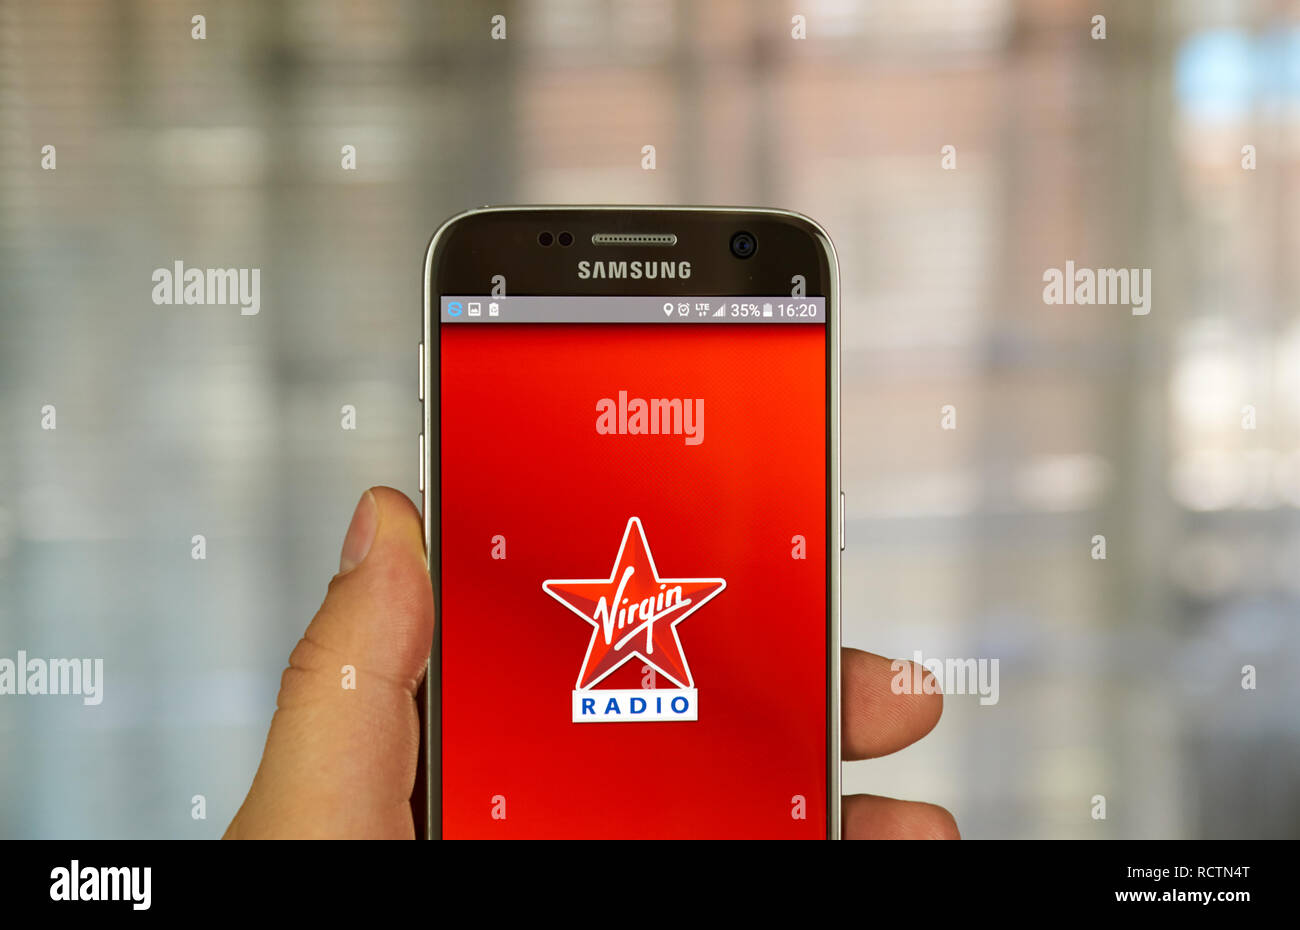 MONTREAL, CANADA - JUNE 24, 2016 : Virgin Radio android application on Samsung S7 screen. Virgin Radio is a brand owned by the Virgin Group. Stock Photo